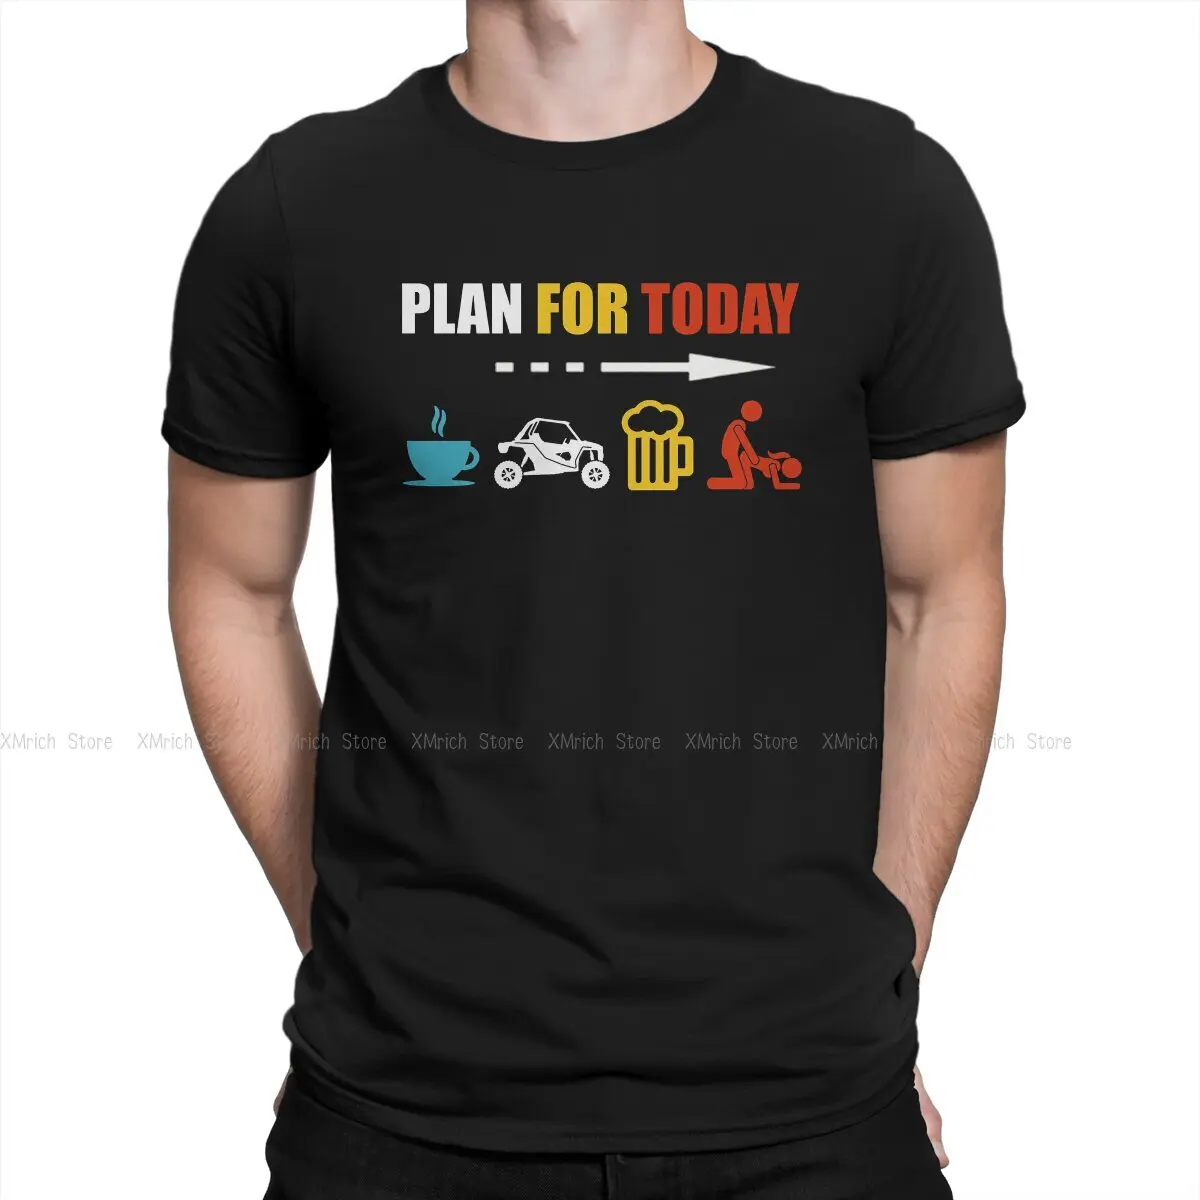 

Plan For Today T-Shirts Men Beer Lover Father's Day Gift Fashion Pure Cotton Tees O Neck Short Sleeve TShirts Gift Idea Clothes